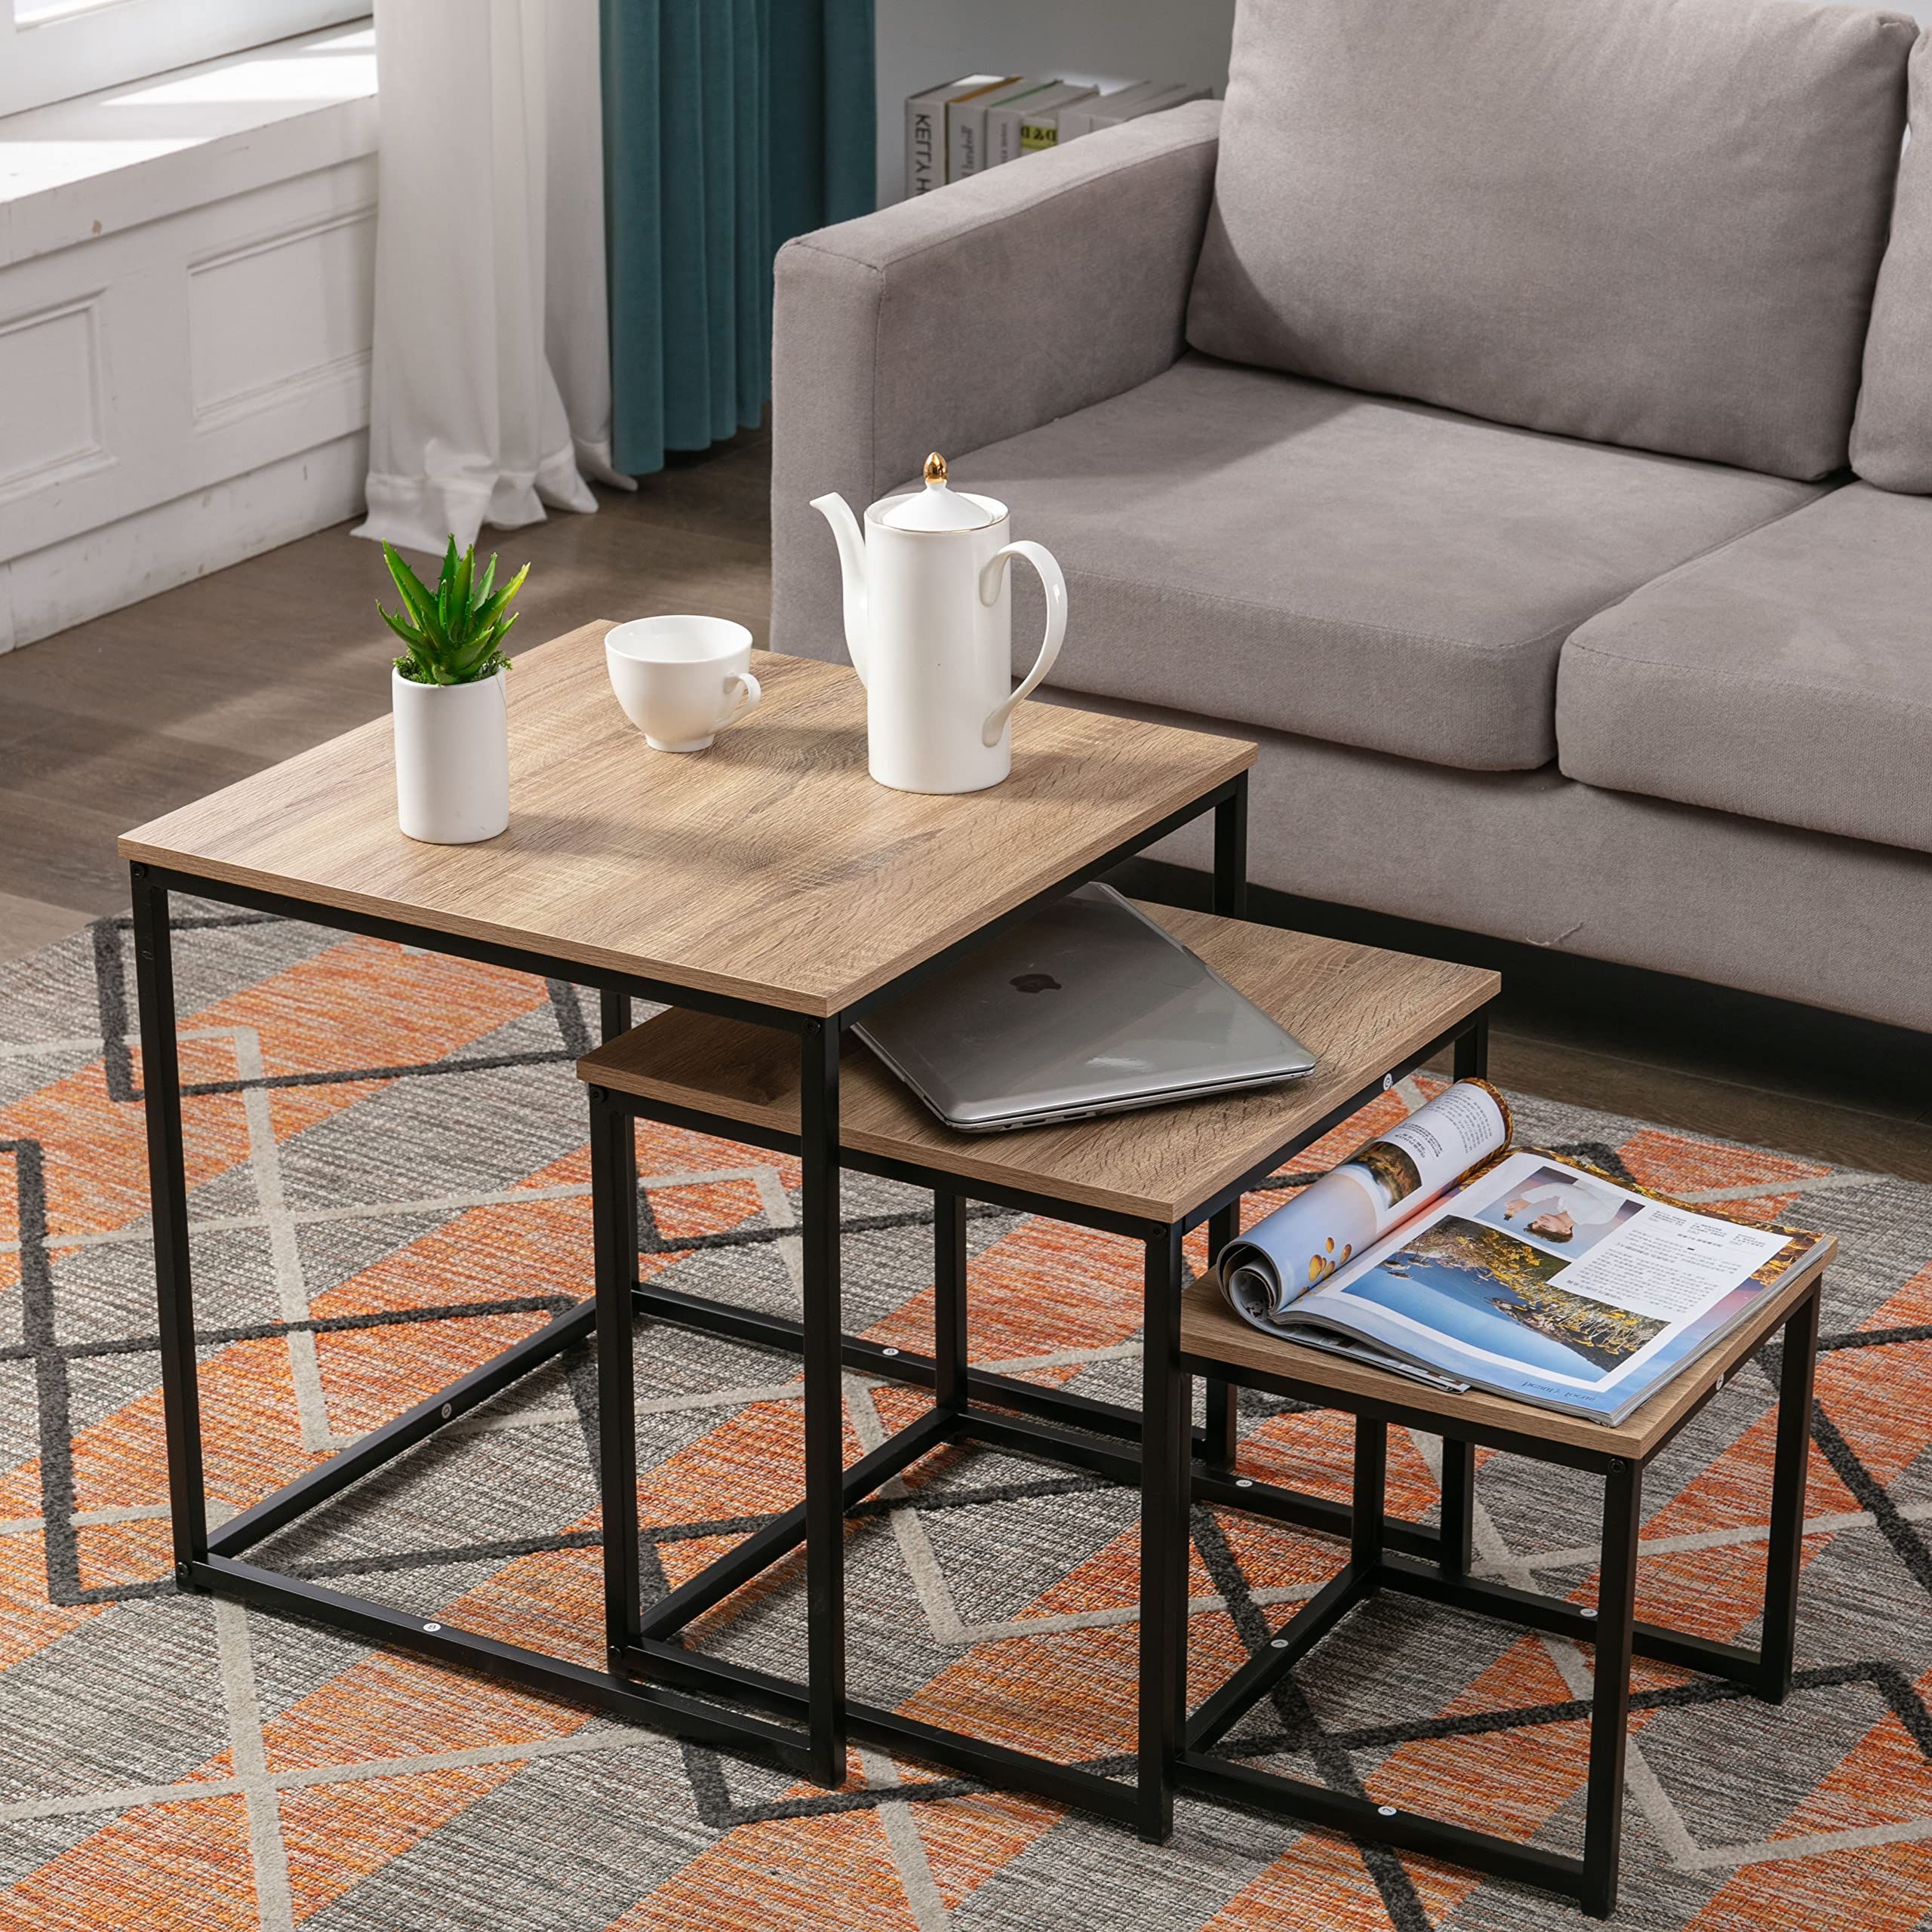 Current Mcc Direct Nest Coffee Table 3 In 1 Set Compact Modern Design For Space  Saving For Any Room (natural) : Amazon.co.uk: Home & Kitchen For Coffee Tables Of 3 Nesting Tables (Photo 3 of 10)